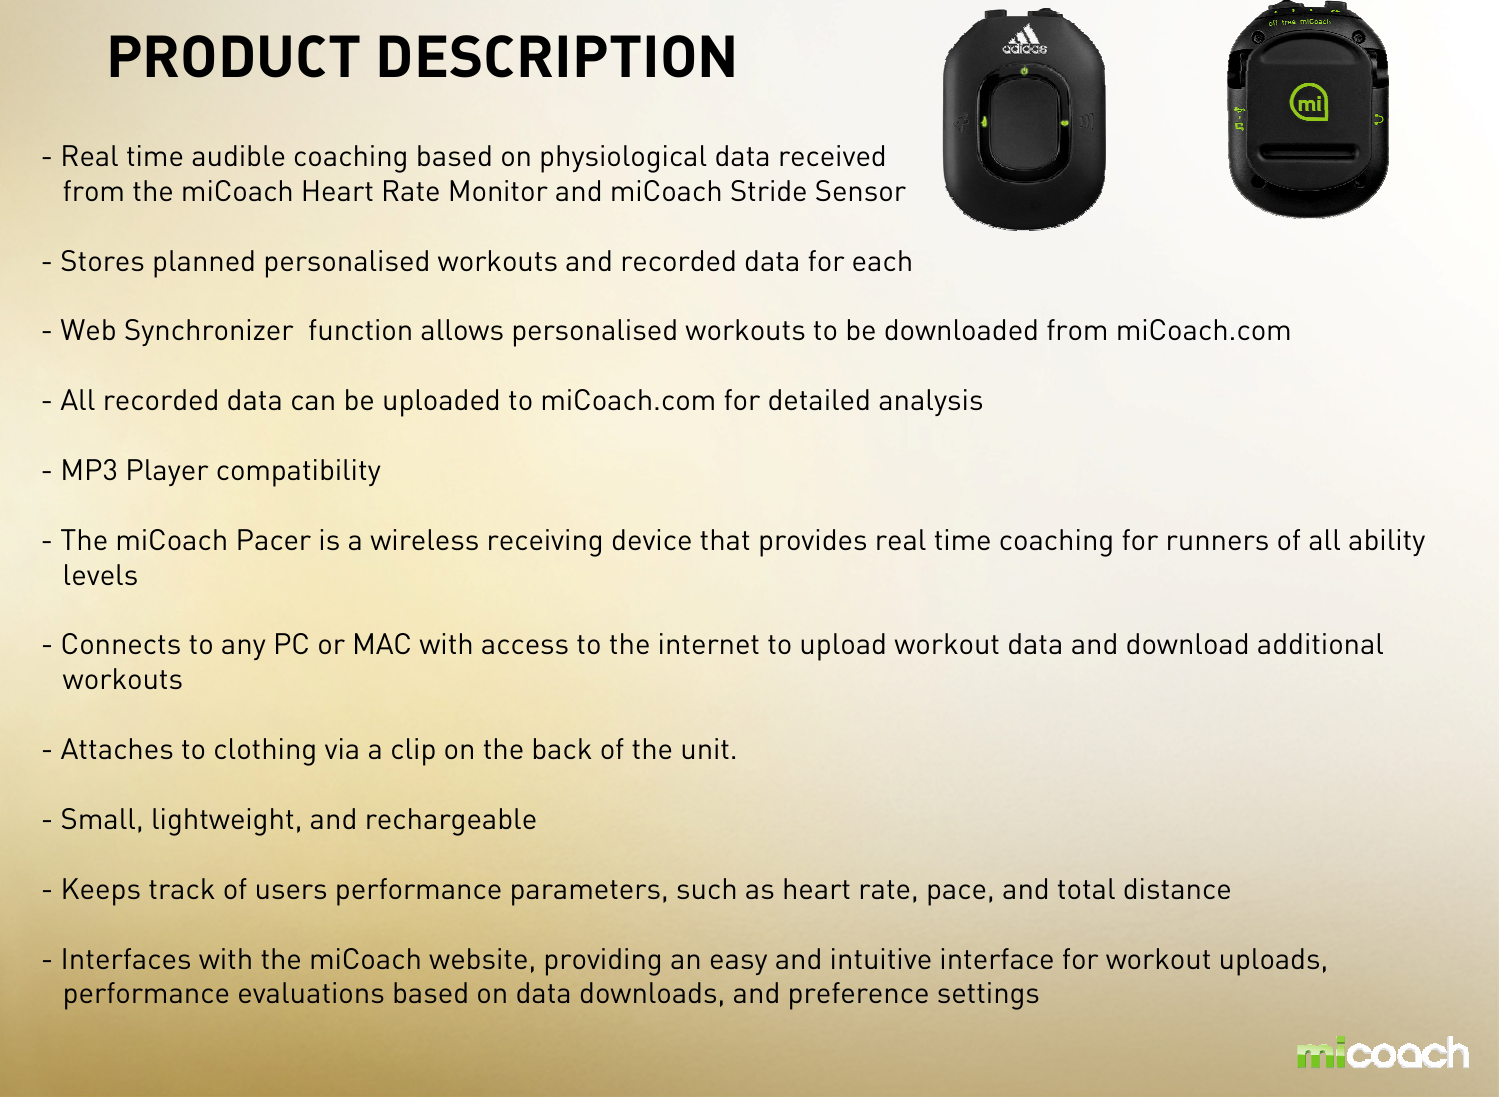 PRODUCT DESCRIPTION- Real time audible coaching based on physiological data receivedfrom the miCoach Heart Rate Monitor and miCoach Stride Sensor- Stores planned personalised workouts and recorded data for each- Web Synchronizer  function allows personalised workouts to be downloaded from miCoach.com- All recorded data can be uploaded to miCoach.com for detailed analysis - MP3 Player compatibility- The miCoach Pacer is a wireless receiving device that provides real time coaching for runners of all ability levels- Connects to any PC or MAC with access to the internet to upload workout data and download additional workouts- Attaches to clothing via a clip on the back of the unit.- Small, lightweight, and rechargeable- Keeps track of users performance parameters, such as heart rate, pace, and total distance - Interfaces with the miCoach website, providing an easy and intuitive interface for workout uploads, performance evaluations based on data downloads, and preference settings